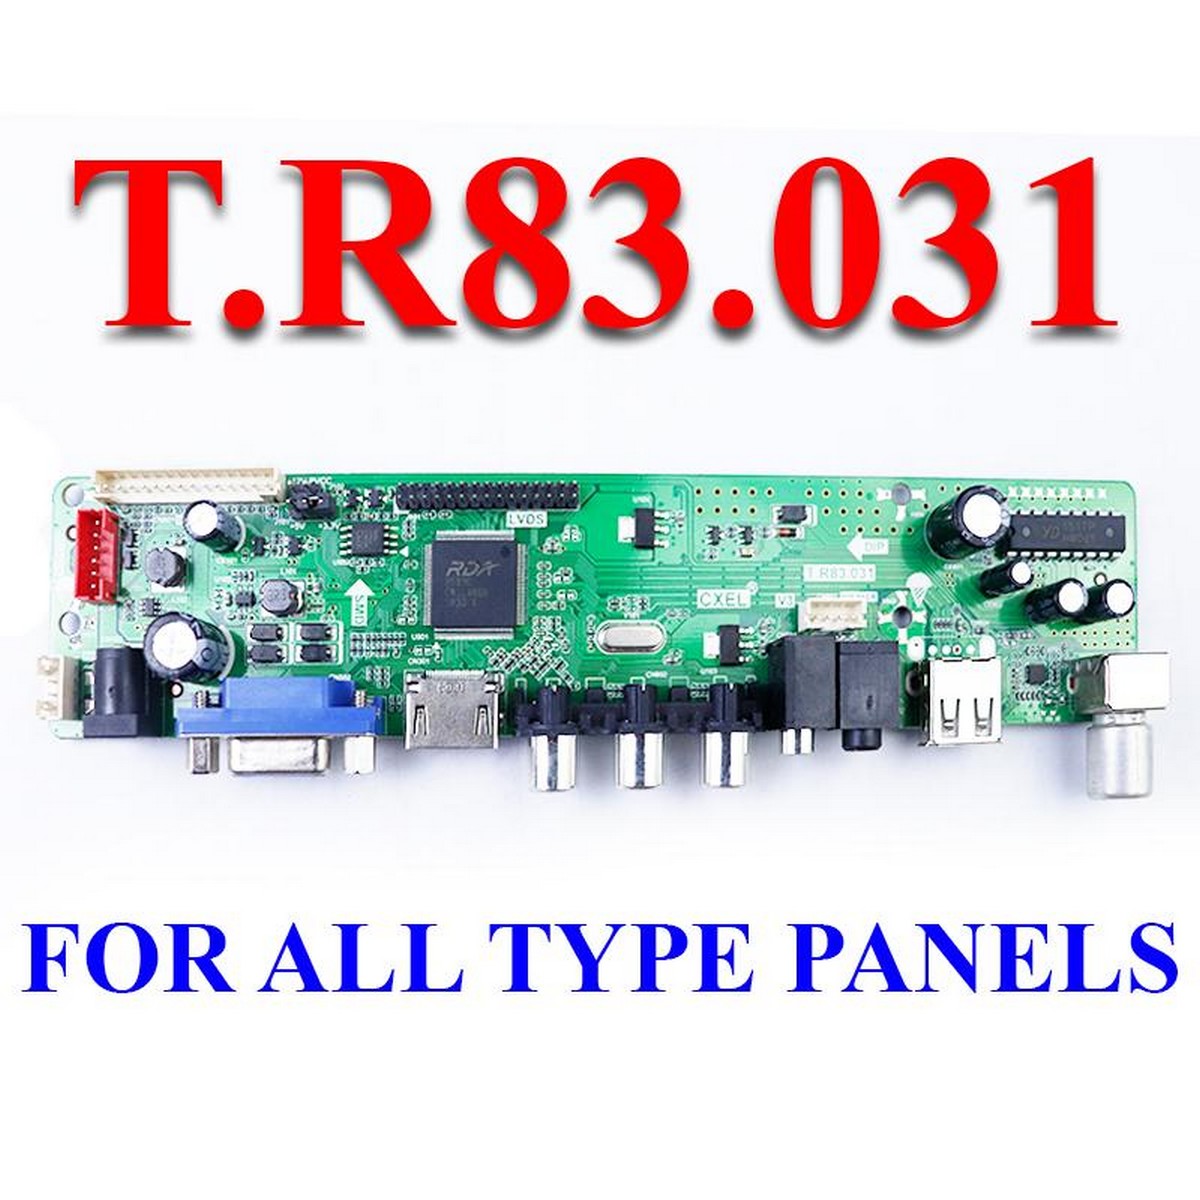 T.R83.031 Software All Resolution Free Download